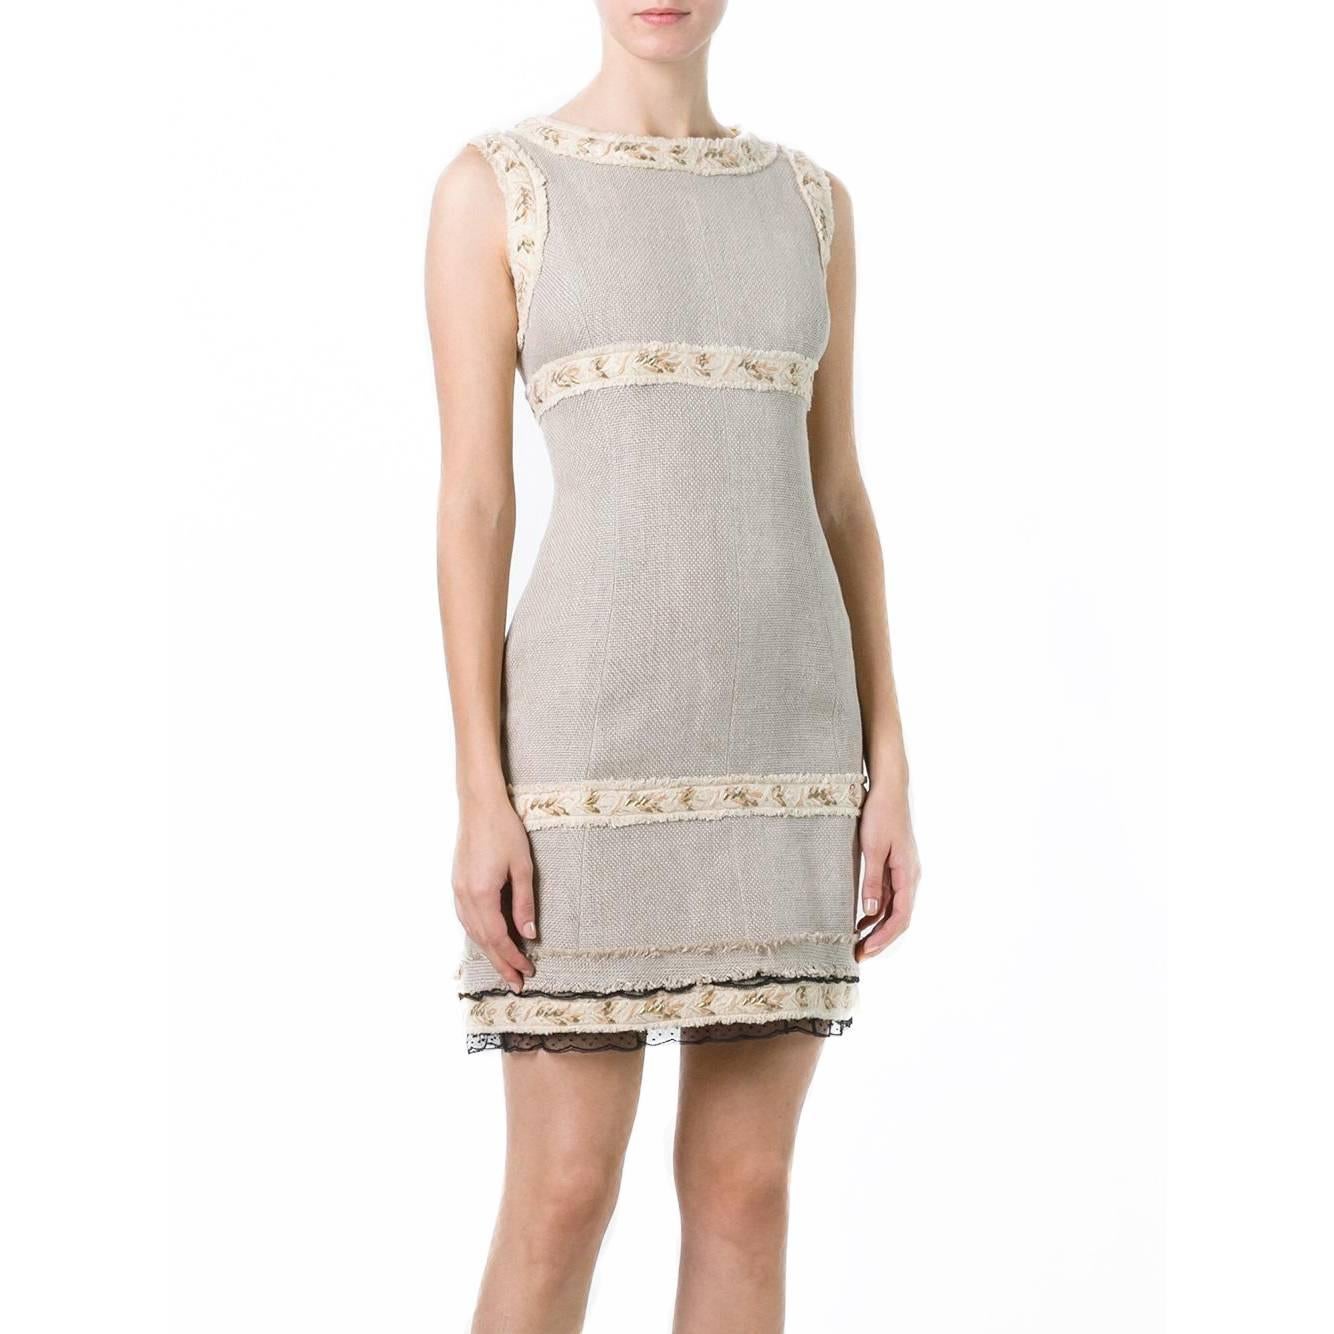 Discover the rustic romance of Chanel’s spring/summer 2010 barnyard extravaganza with this vintage Chanel sleeveless dress. Cut from hessian, this dress is amped up in true Chanel form with gold-gilded trims, black lace hems and frayed edges.

All